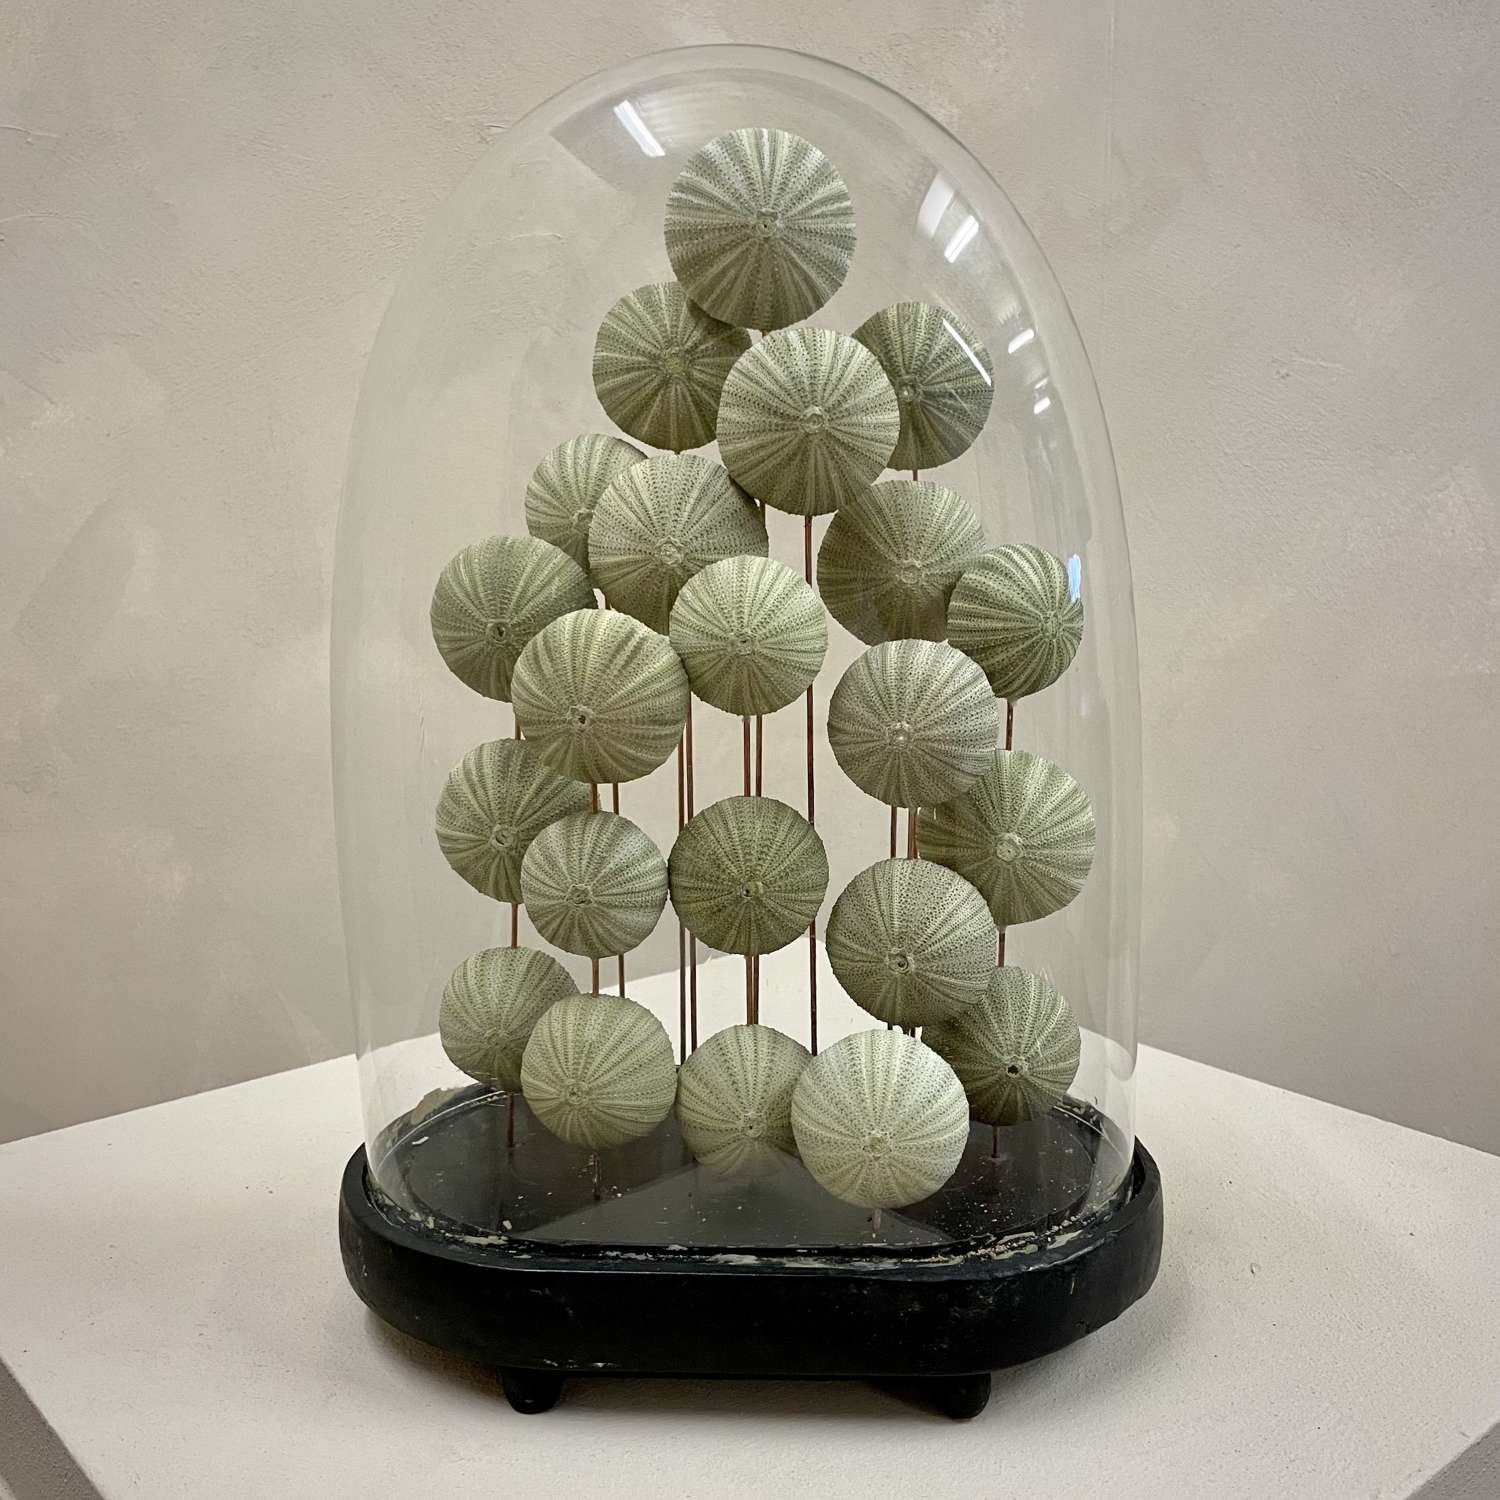 A Collection of Mounted Sea Urchins Encased in a 19th c Dome